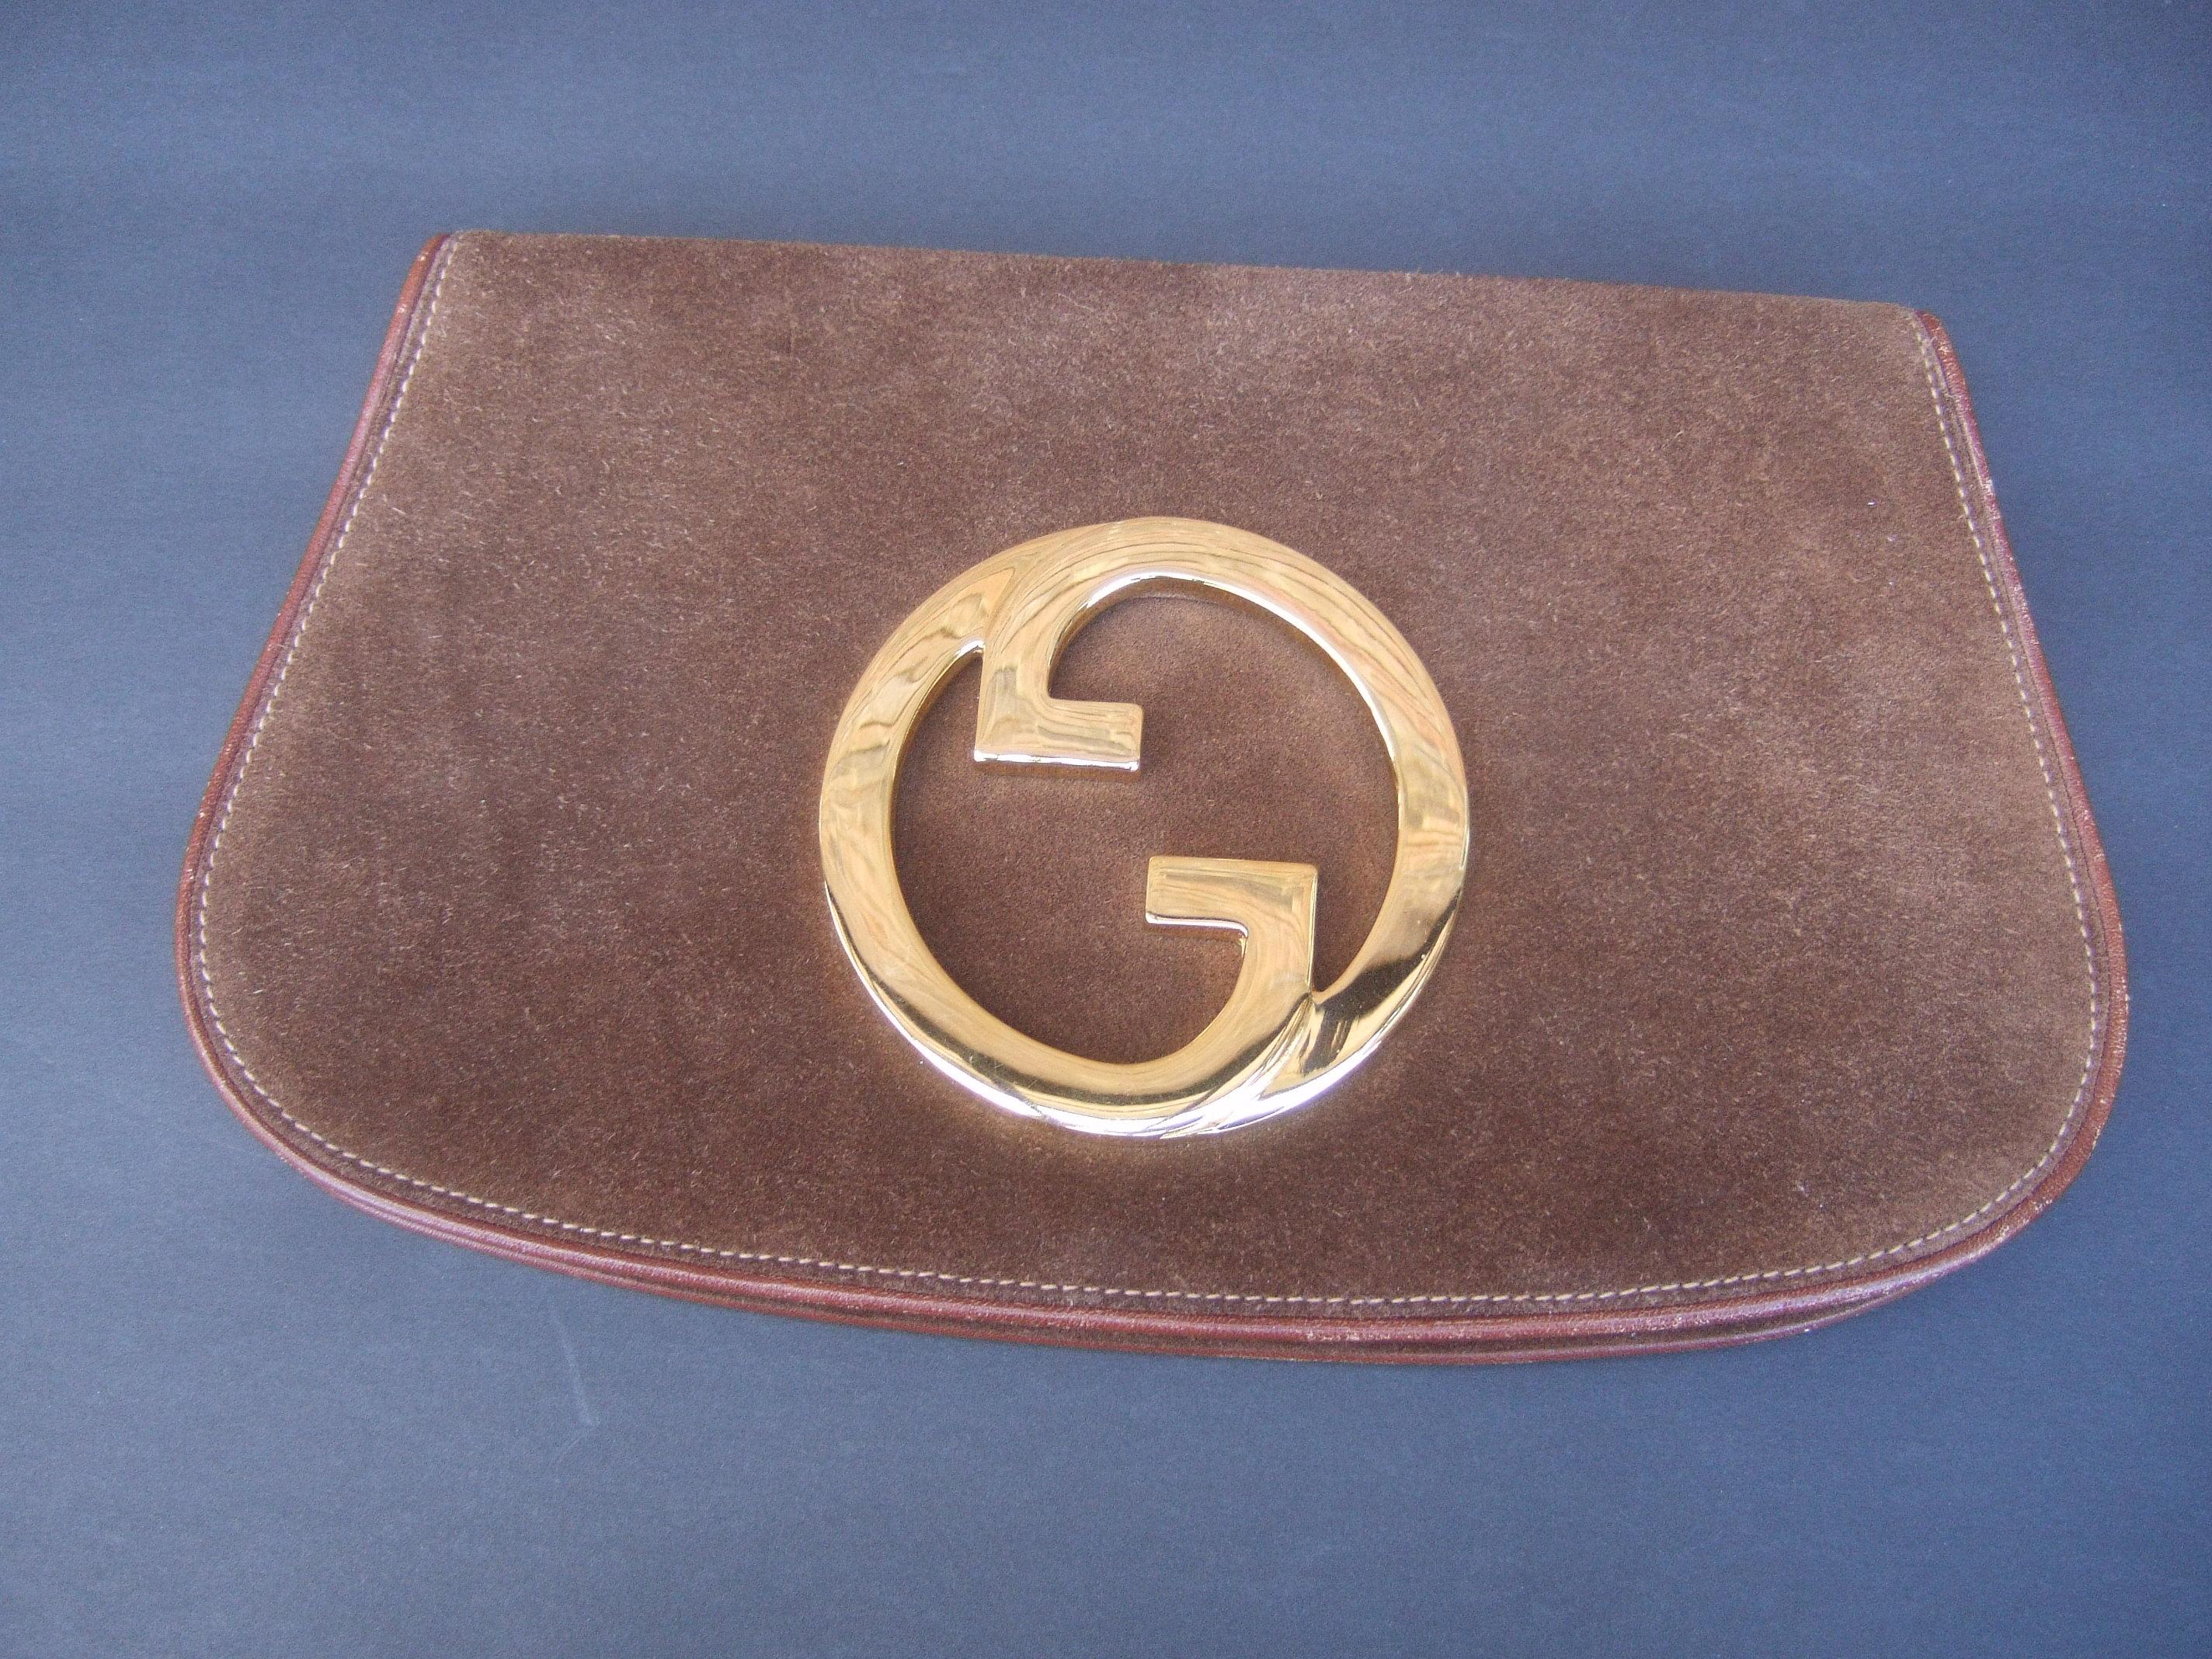 Gucci Italy Brown suede blondie clutch c 1970s
The rare Gucci clutch is covered with luxurious
chocolate brown suede

Adorned with Gucci's massive gilt metal interlocked 
G.G. initials. The interior is lined in tan suede designed 
with a slip pocket